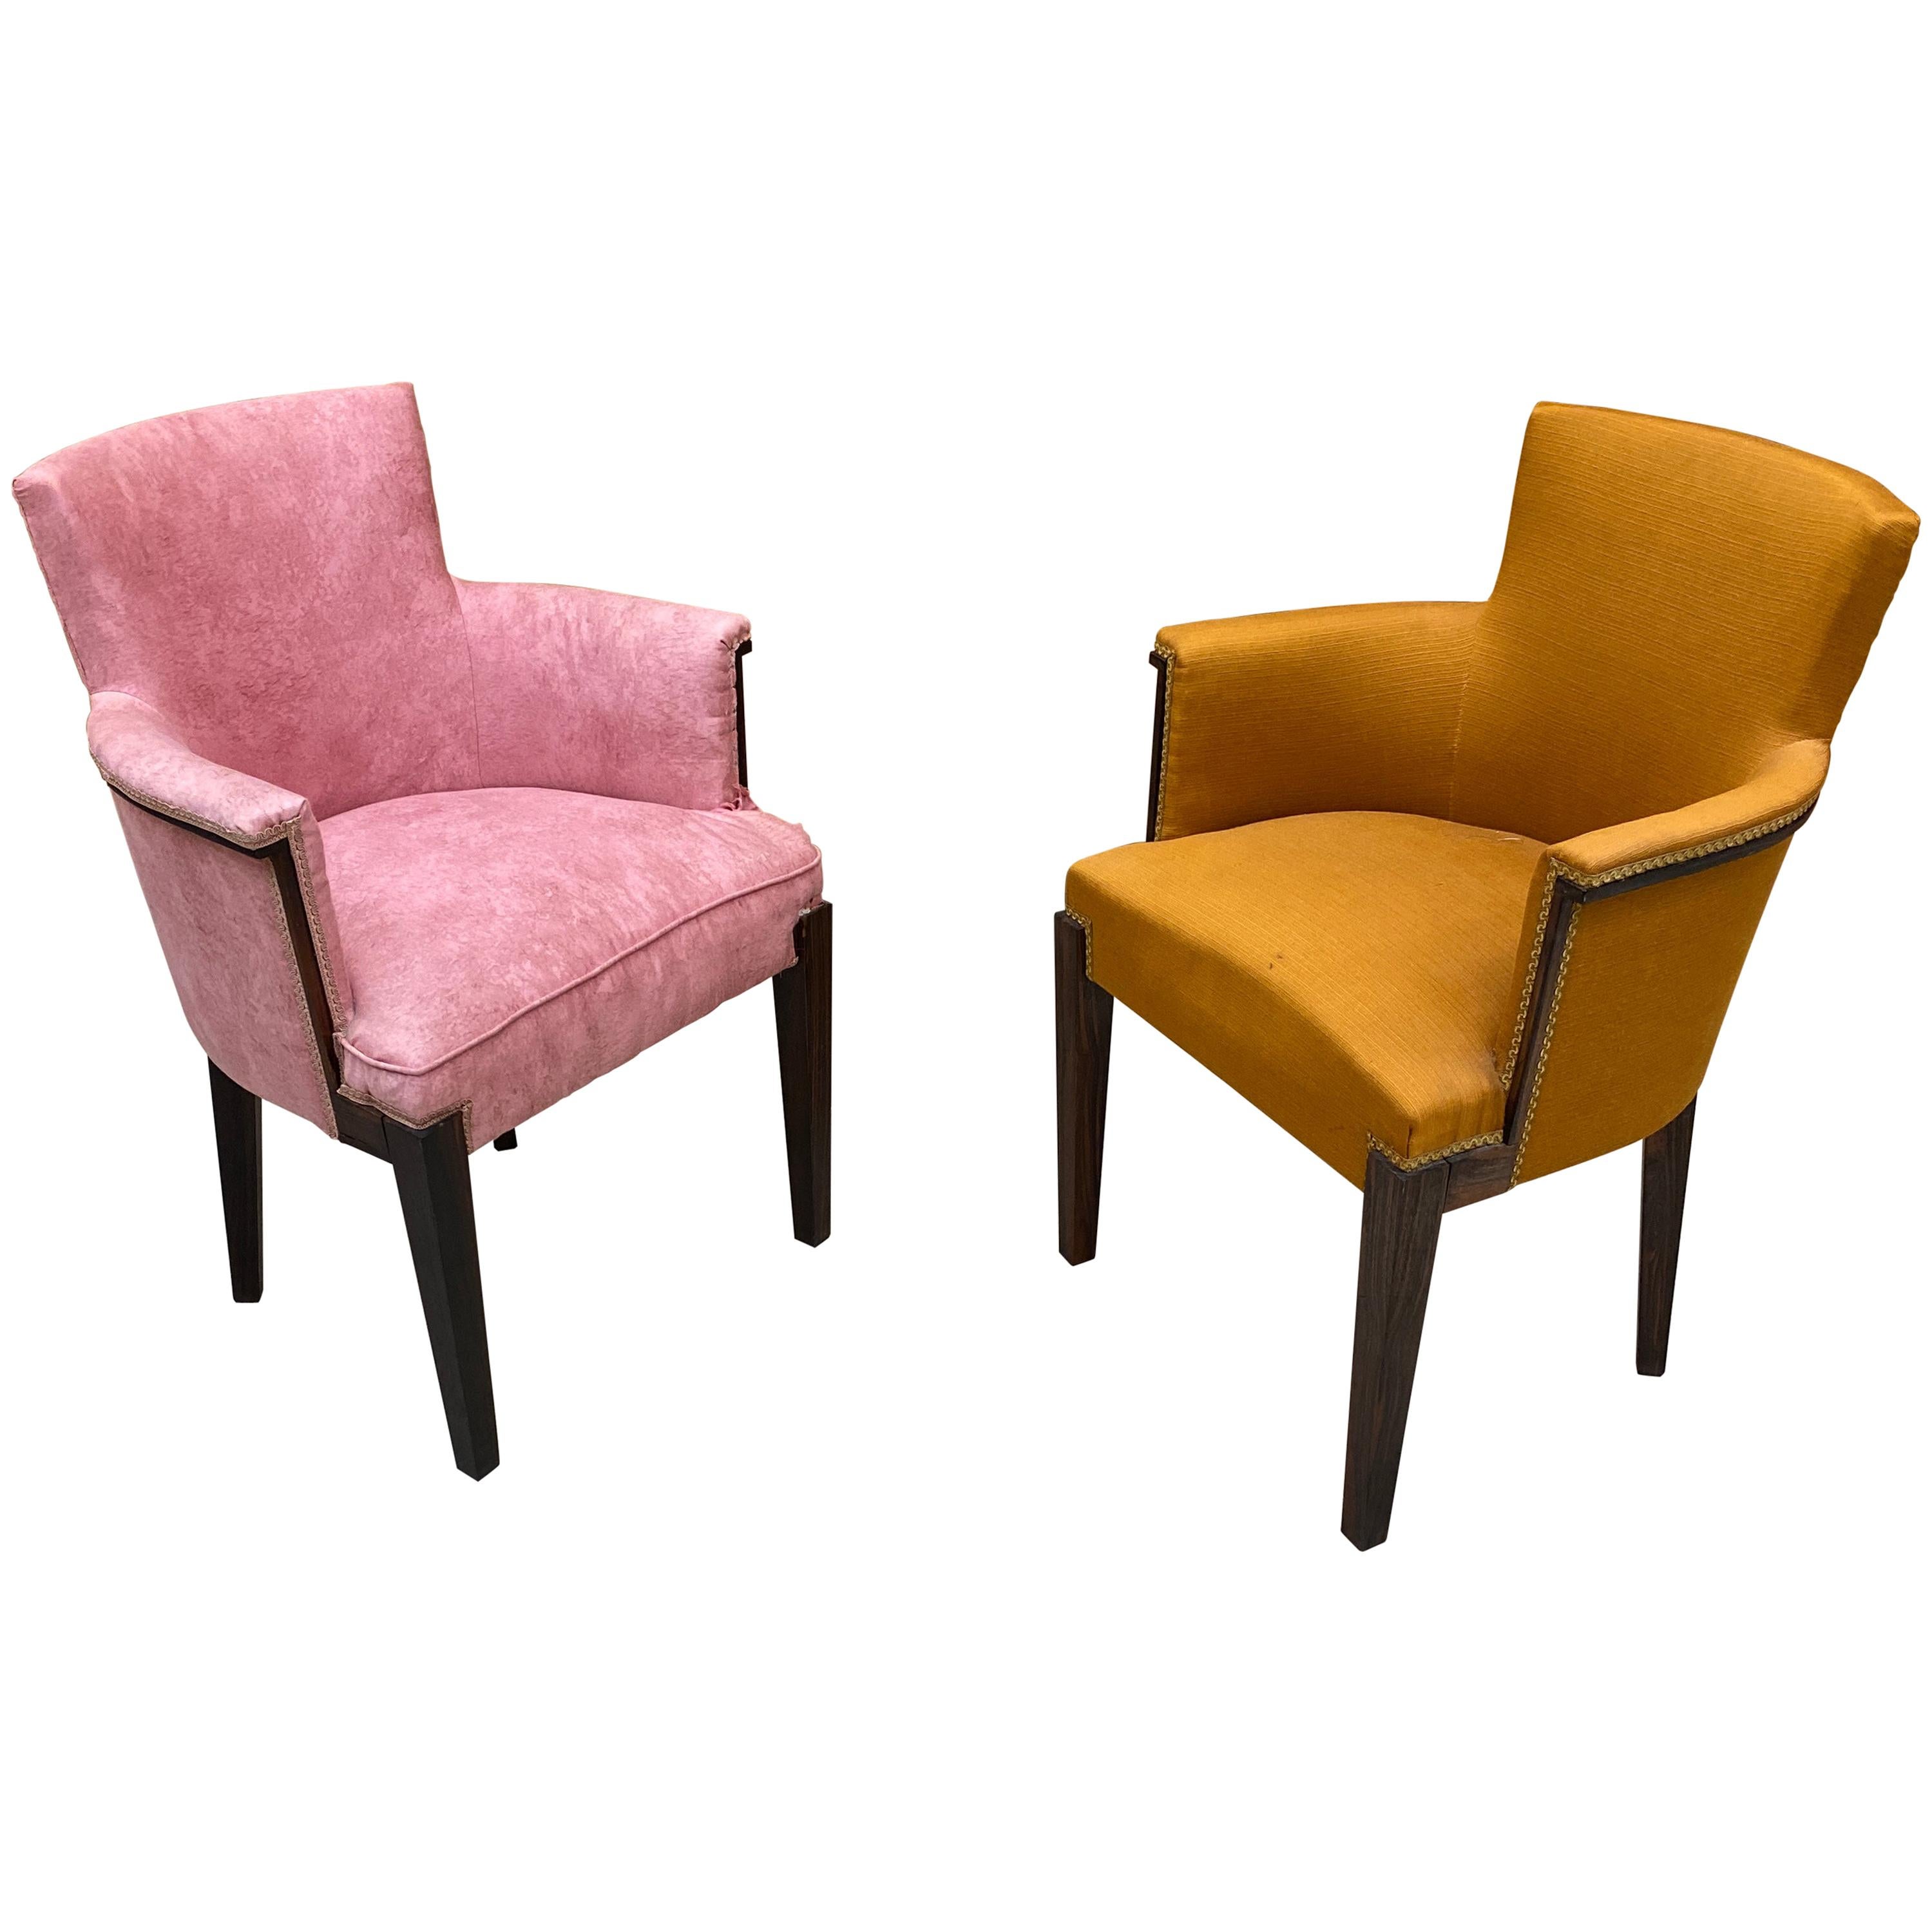 Pair of Elegant Art Deco Armchairs in the Style of Dominique, circa 1930-1940 For Sale